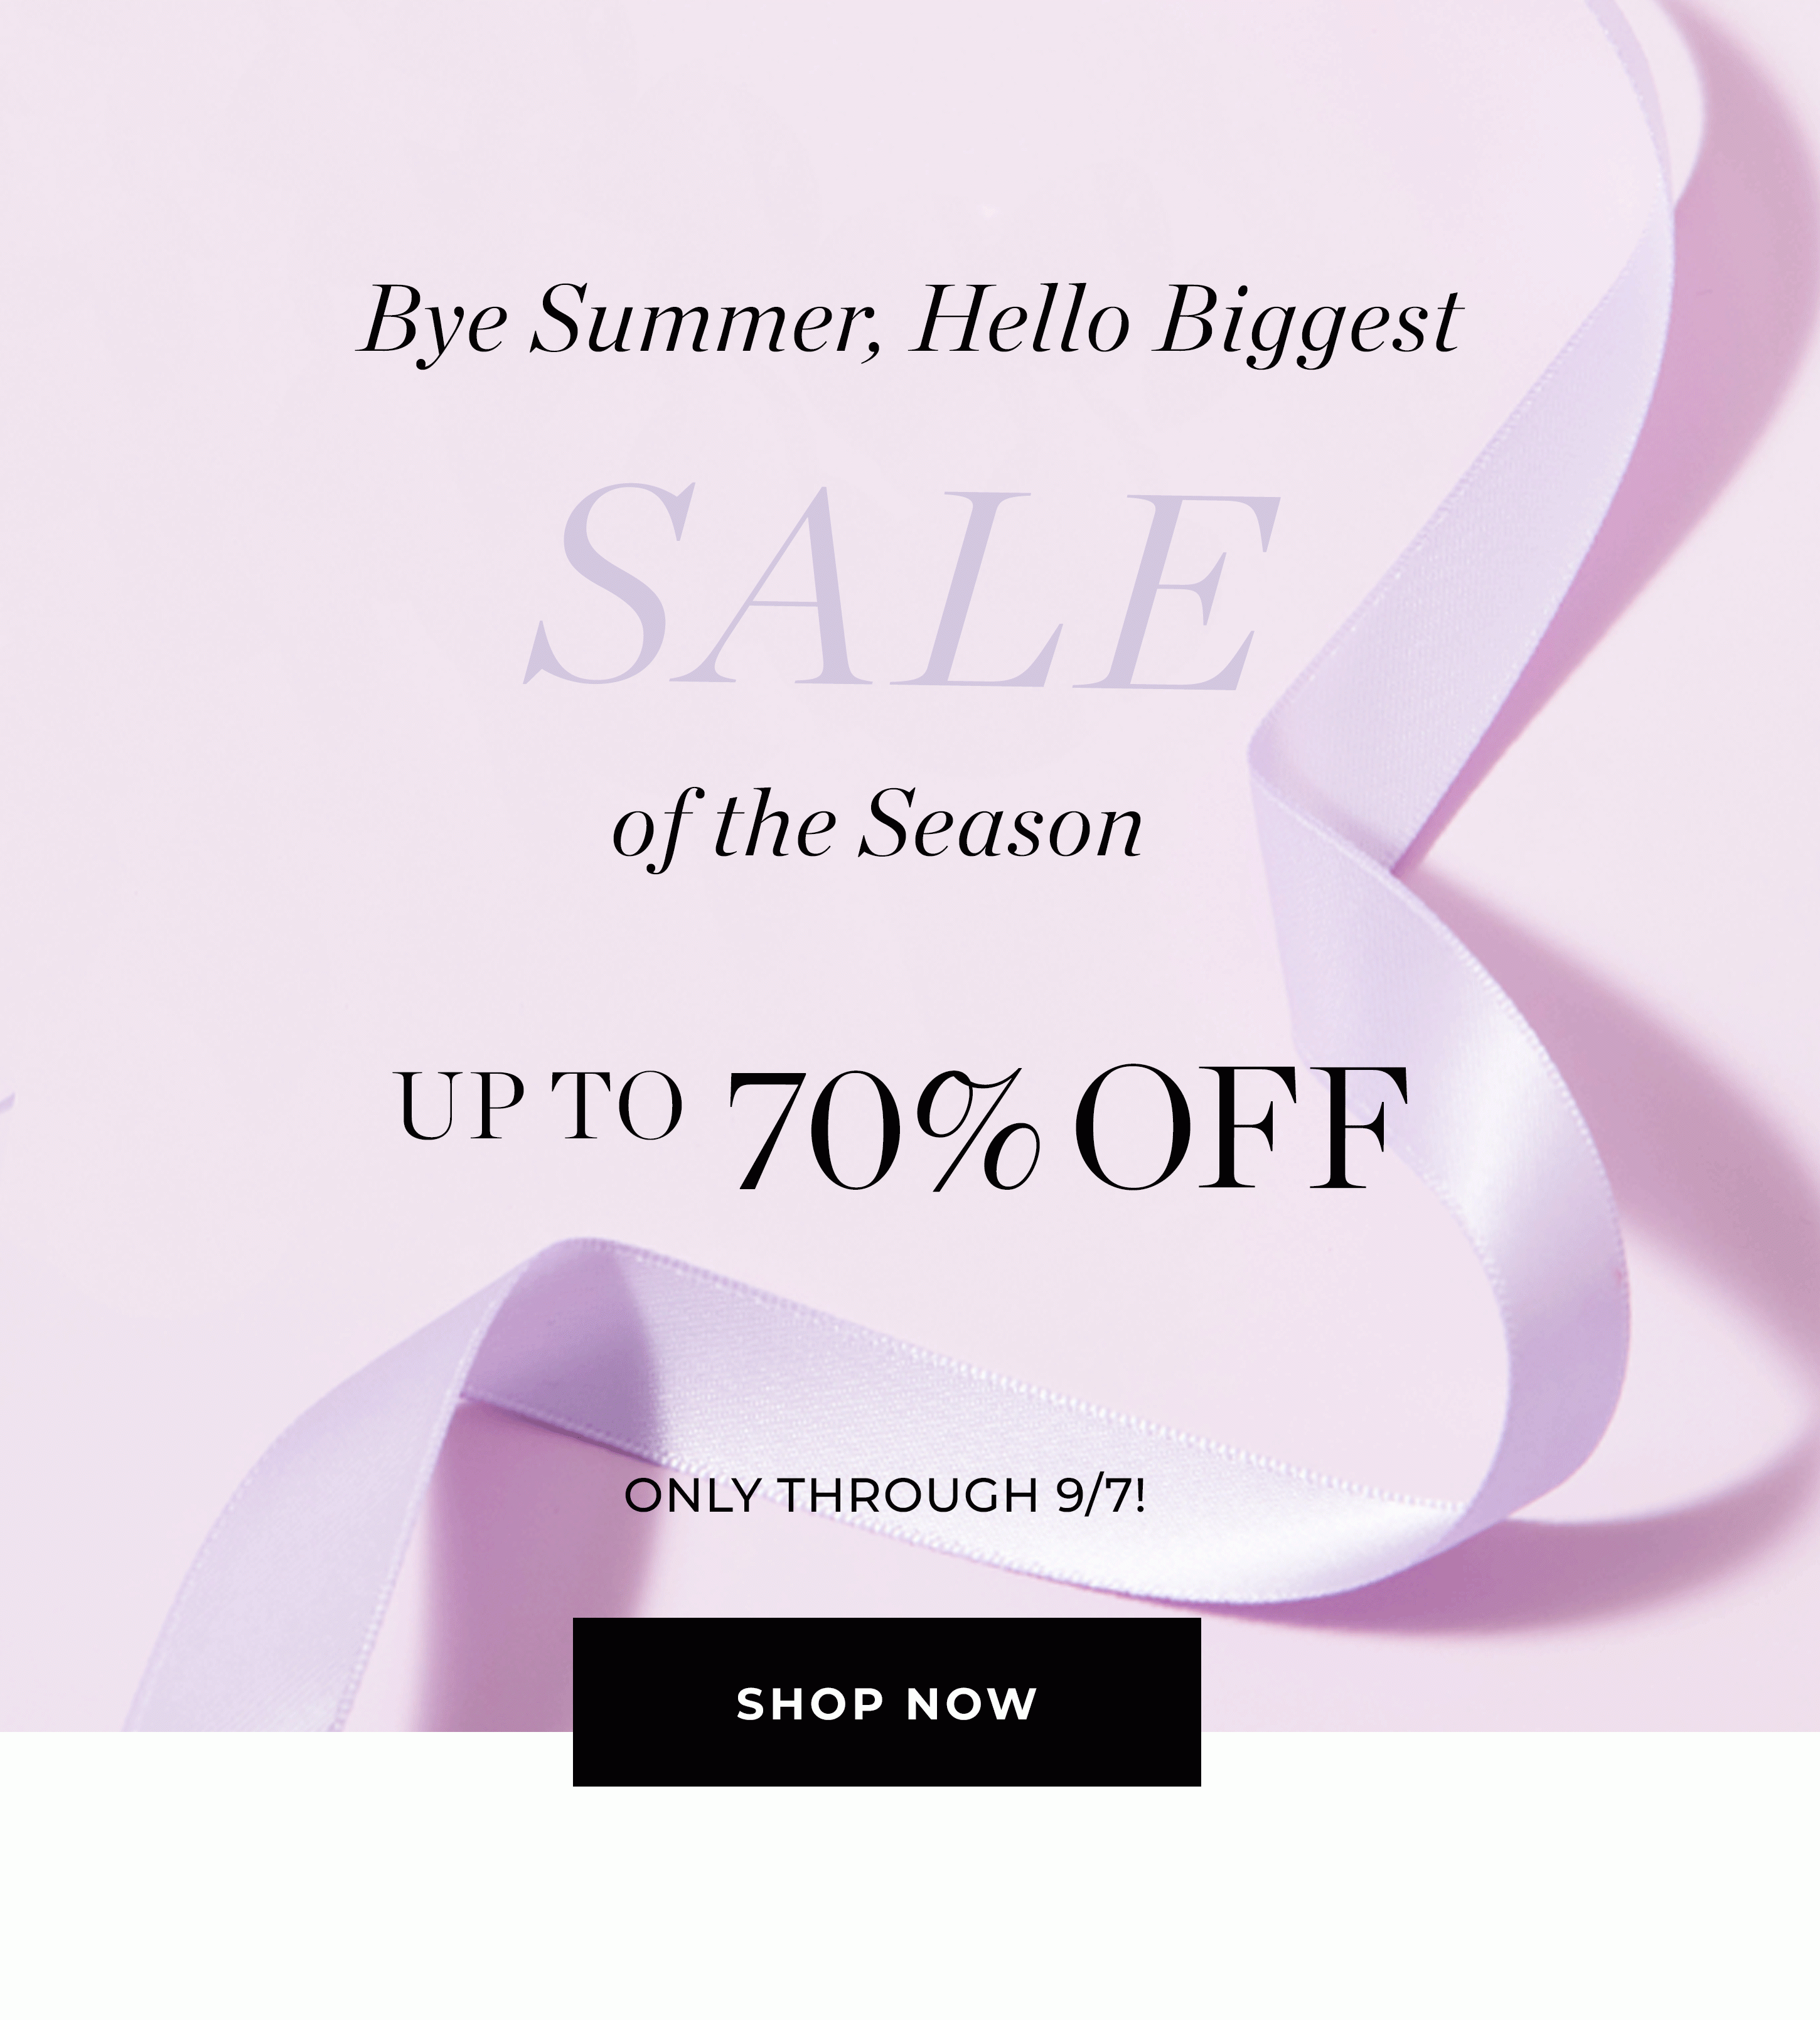 Bye Summer, HELLO biggest sale of the season - up to 70% off!